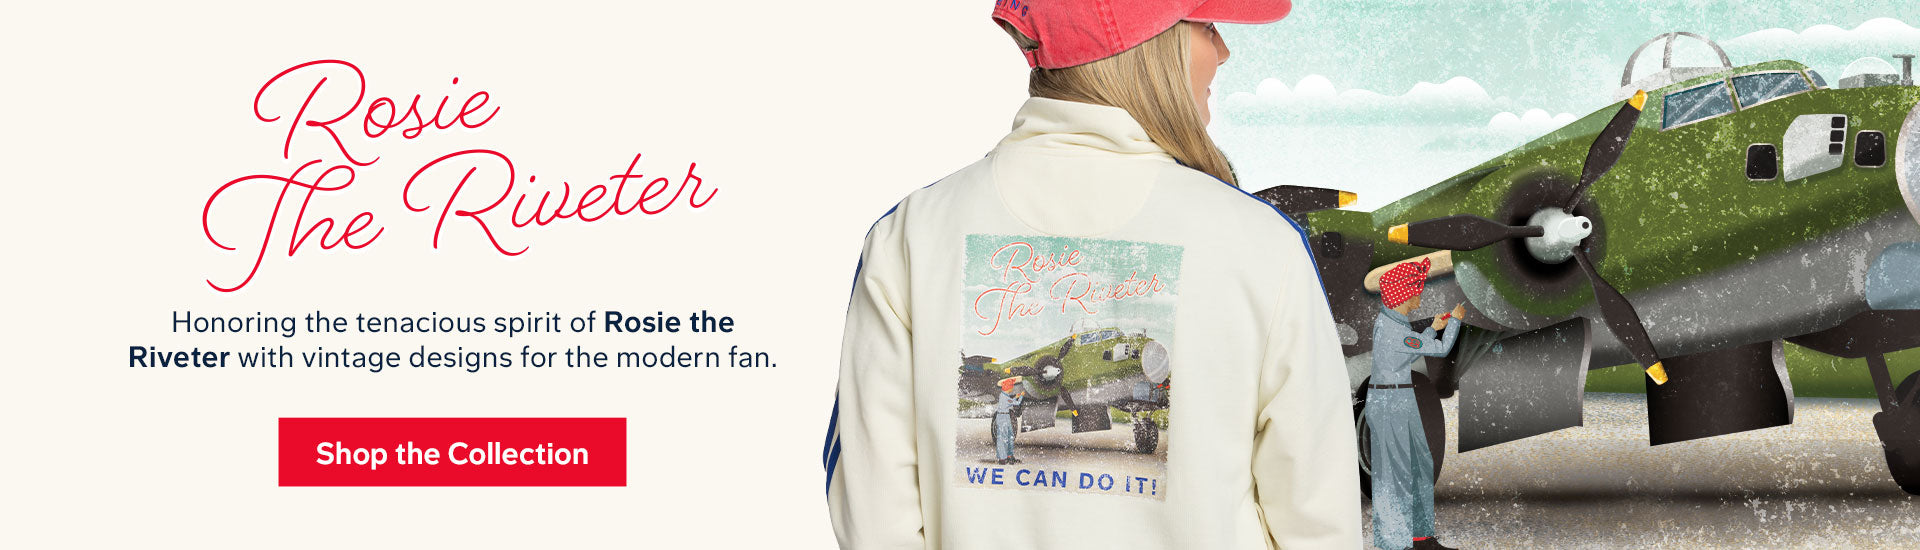 Rosie the Riveter Vintage Image Featuring Lifestyle of Girl Wearing Jacket and Hat HP Desktop Banner